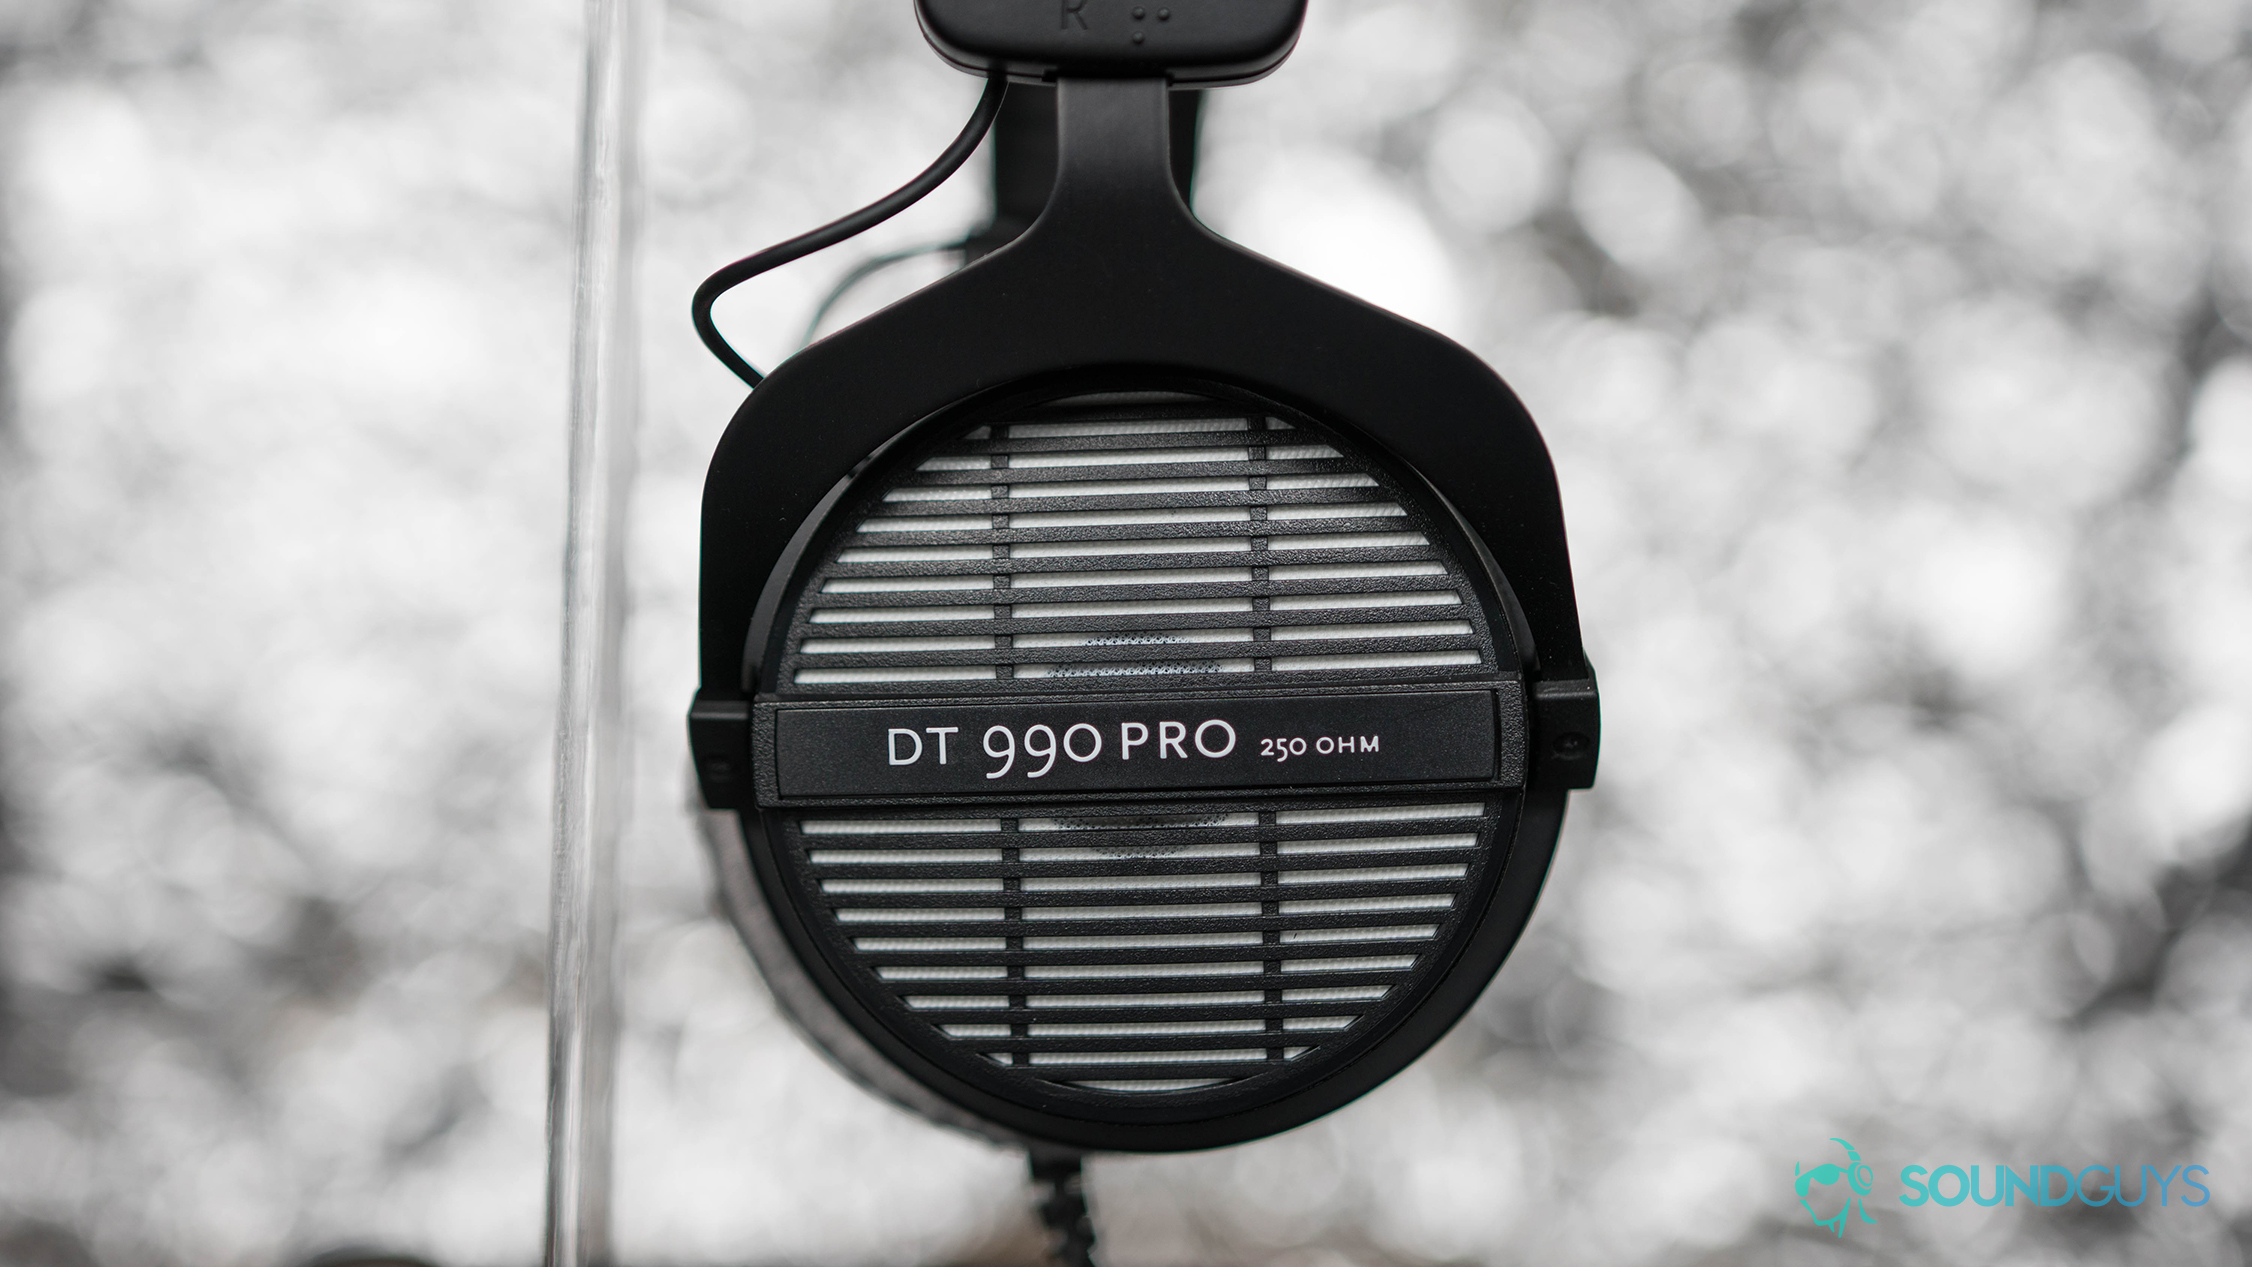 A picture of the Beyerdynamic DT 990 Pro open-back headphones which are too expensive to be a candidate for the best headphones under $100.